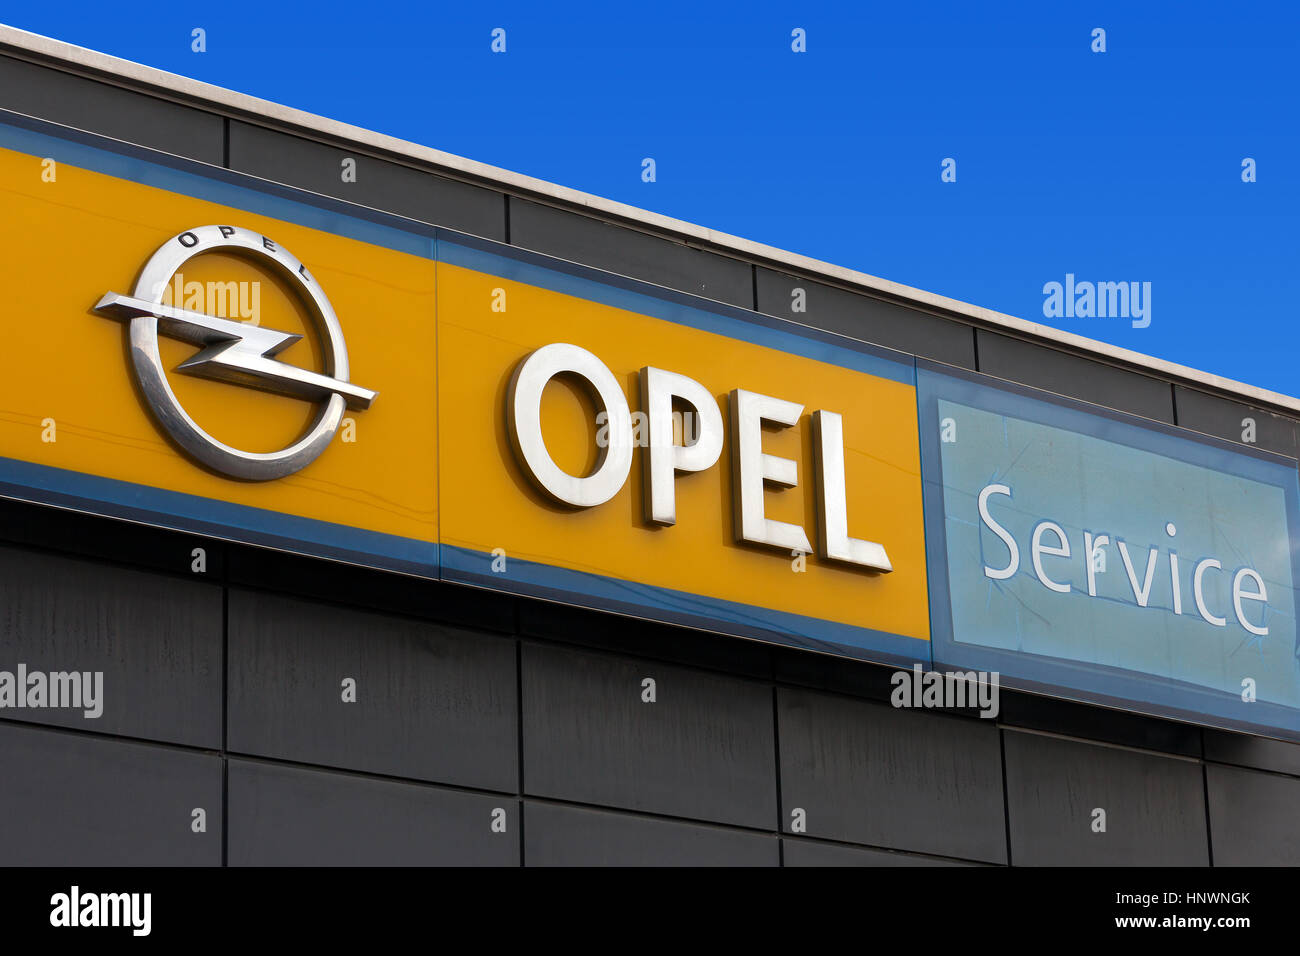 Opel sign at a local dealership. Opel is a German automobile manufacturer headquartered in Germany, subsidiary of the American group General Motors. Stock Photo